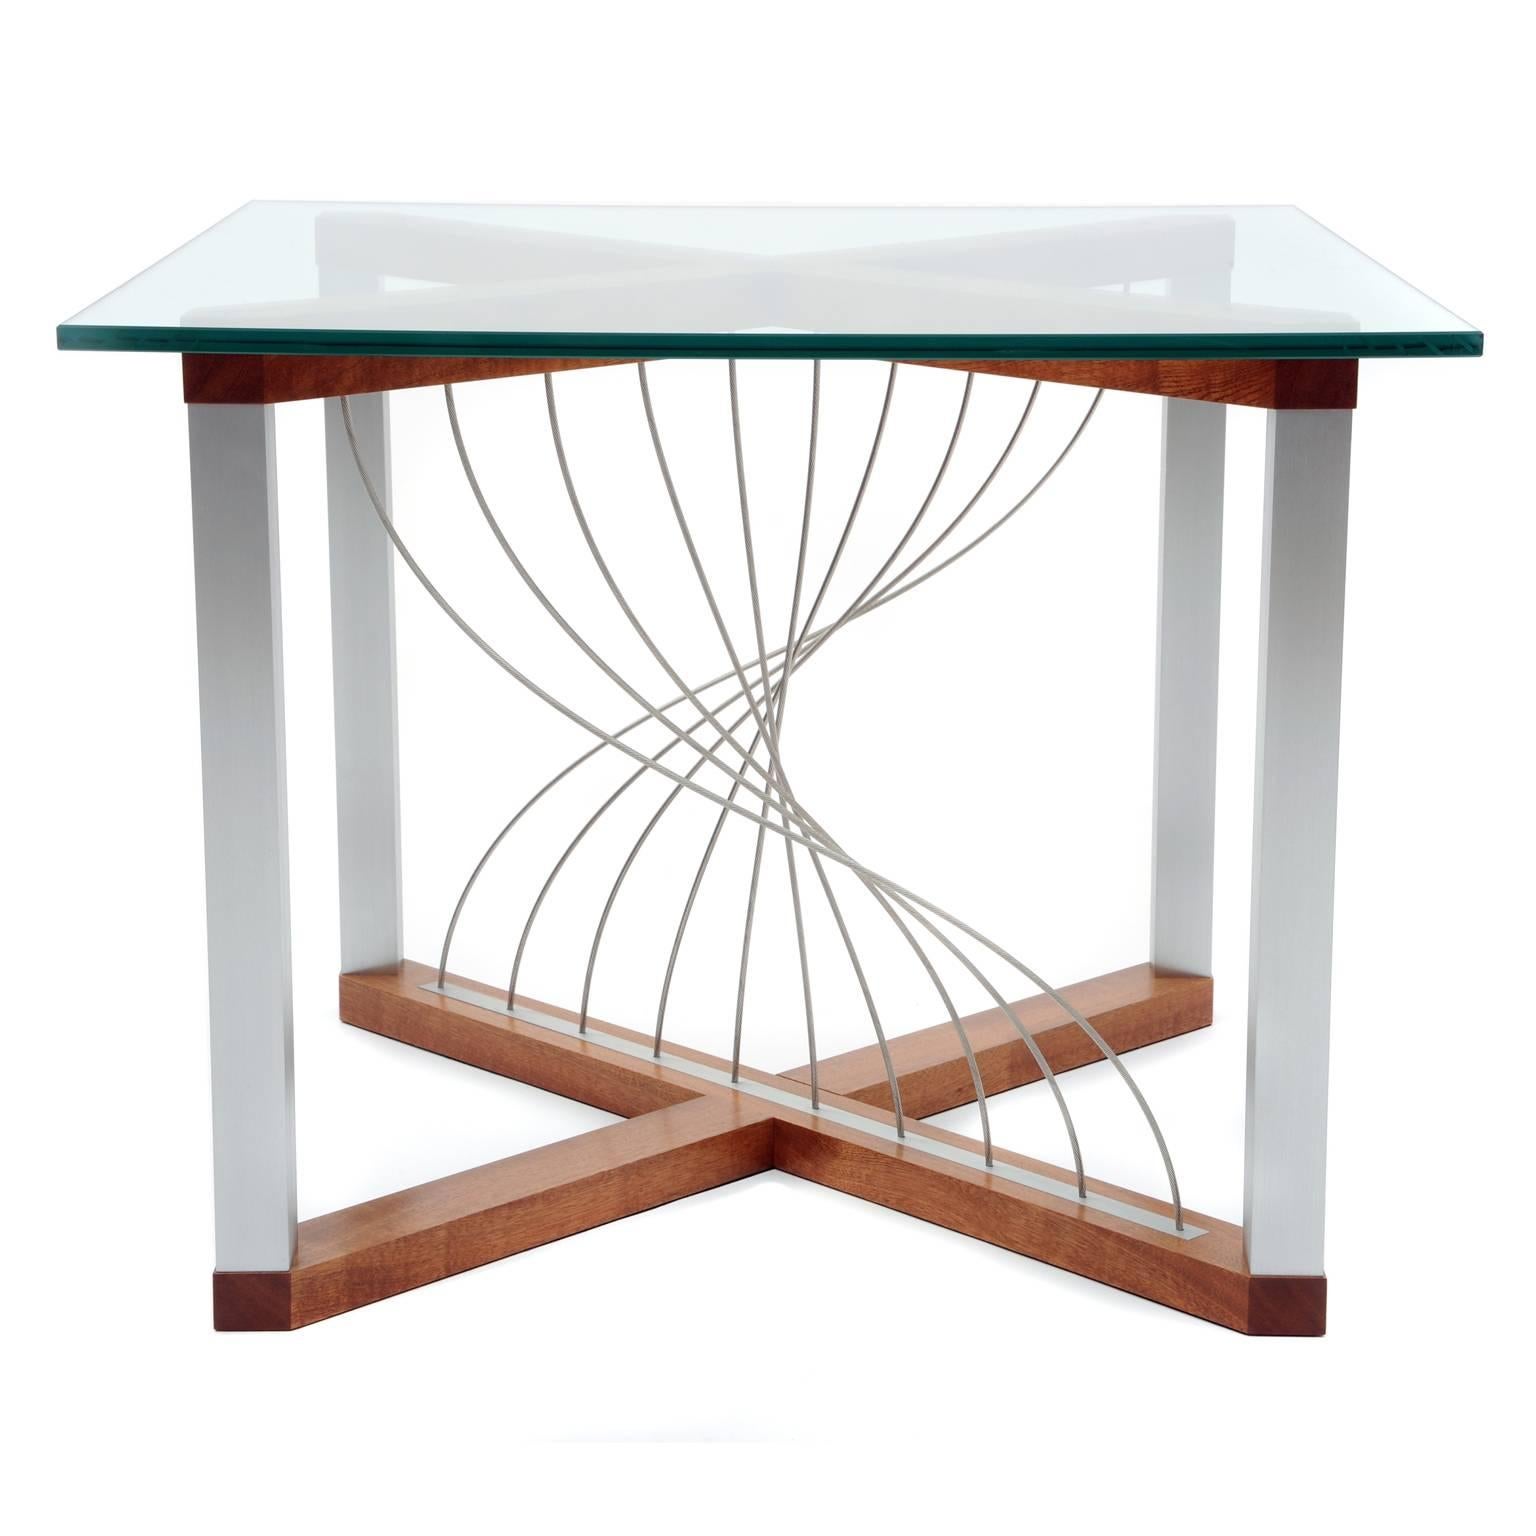 Modern Industrial End/ Side Table by Peter Harrison.  Metal and Mahogany Wood